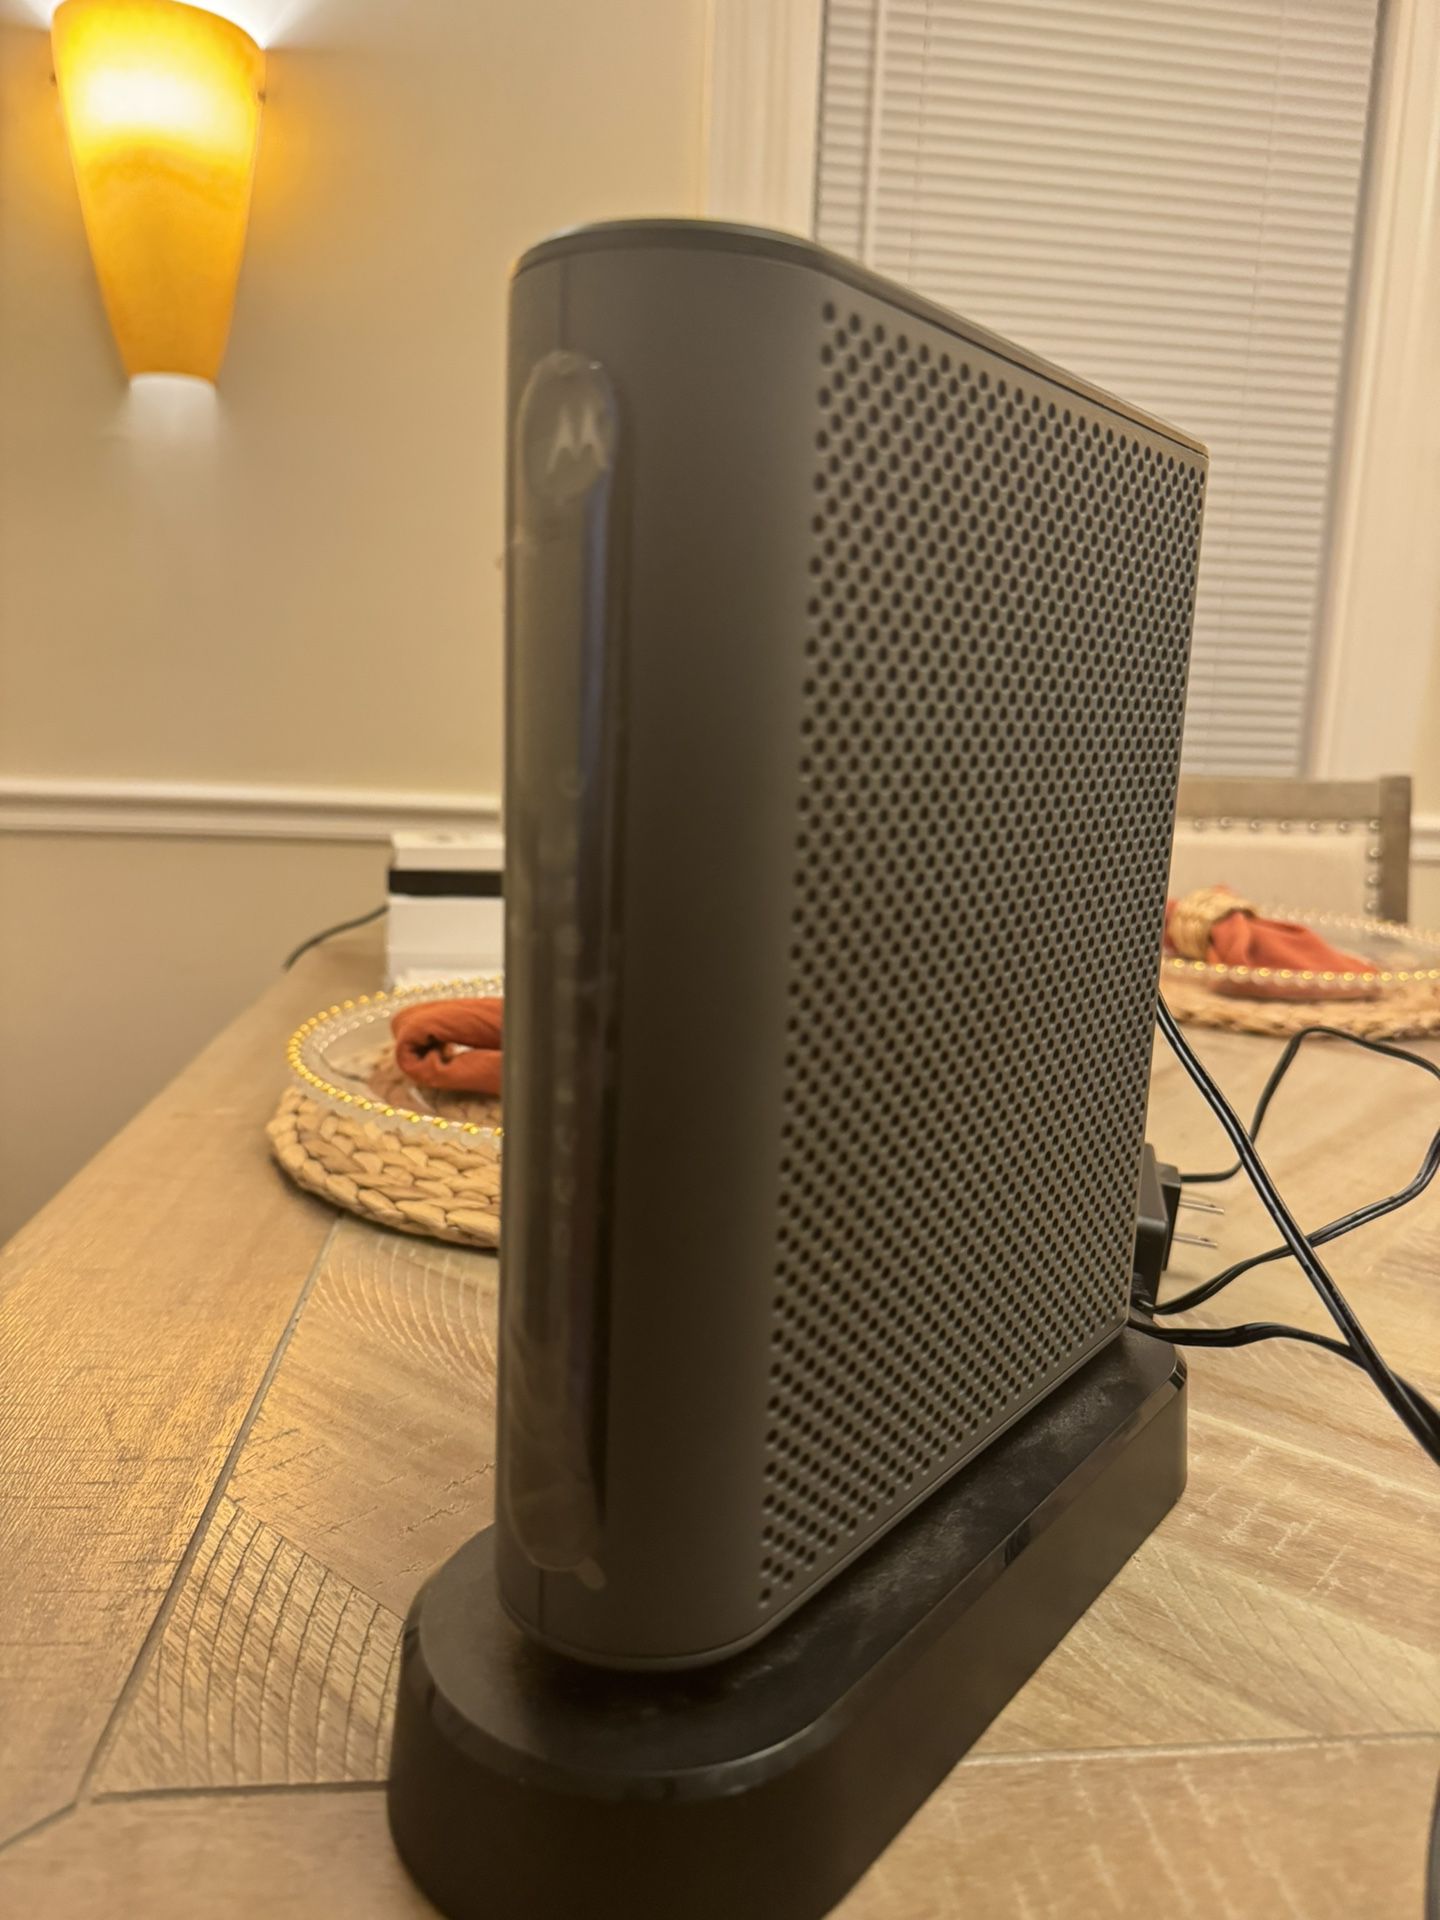 Motorola MT7711 24X8 Cable Modem/Router with Two Phone Ports, DOCSIS 3.0 Modem, and AC1900 Dual Band WiFi Gigabit Router, for Comcast XFINITY Internet